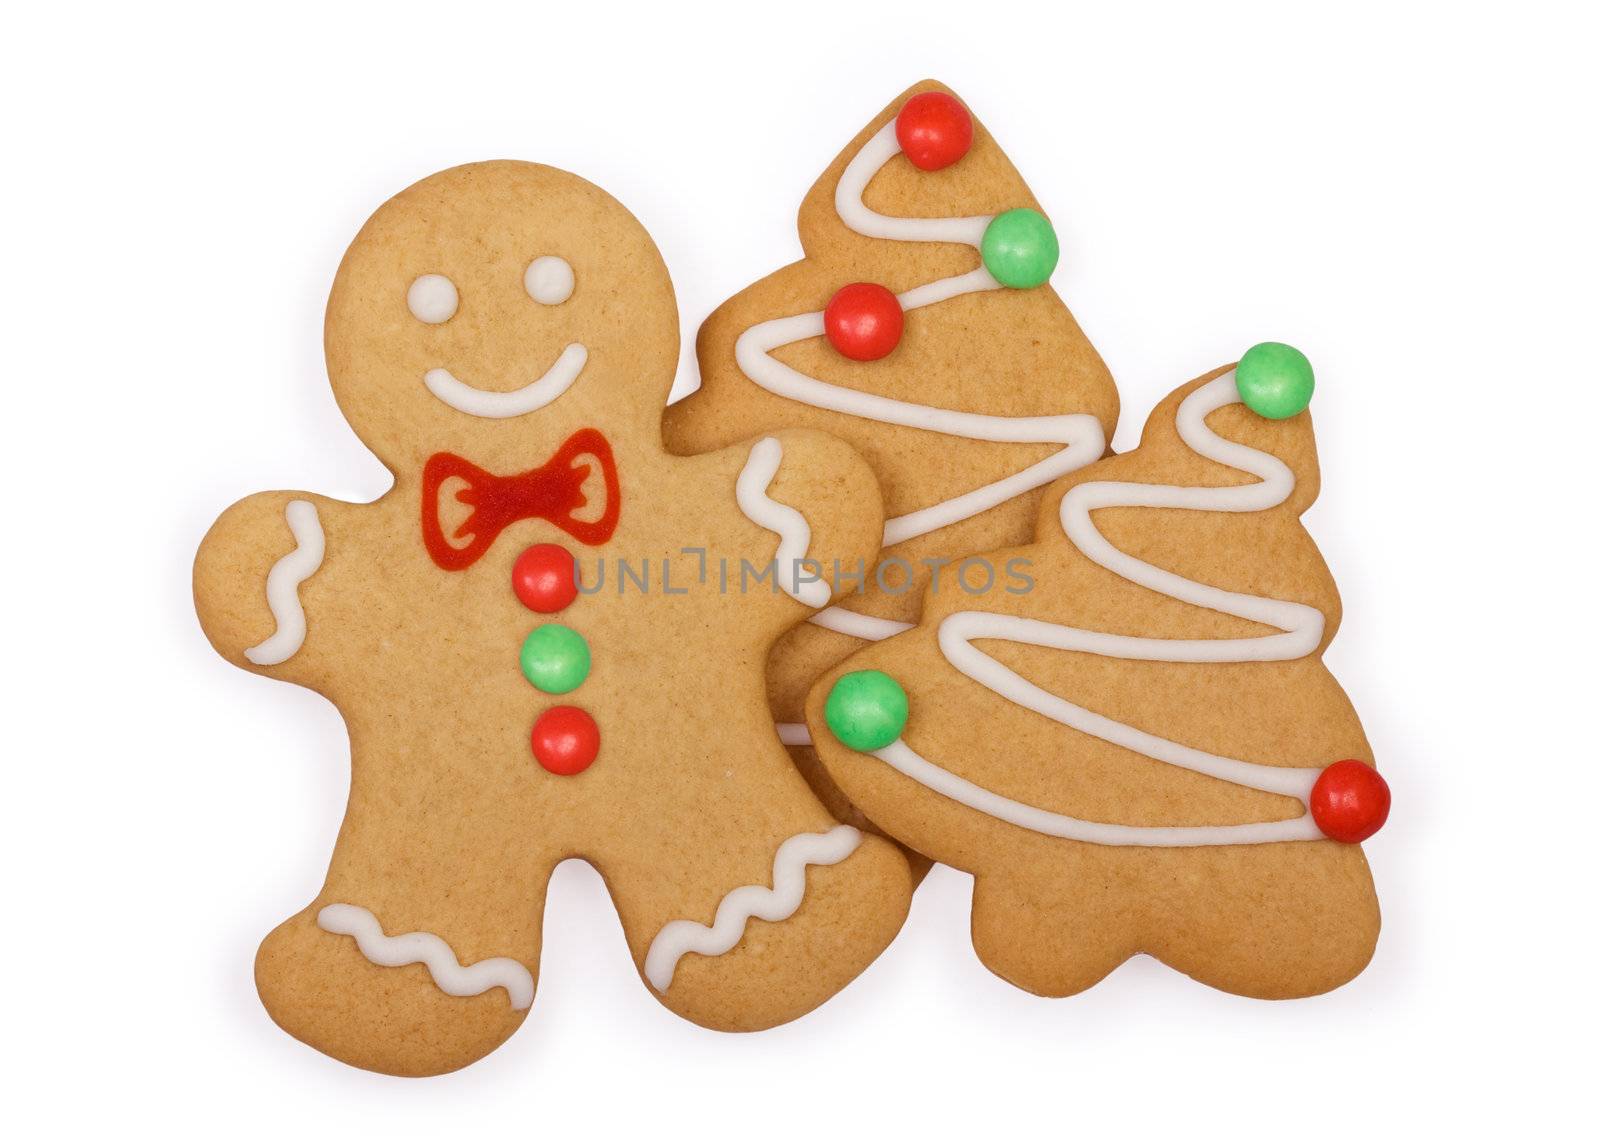 Gingerbread man with gingerbread Christmas tree cookies